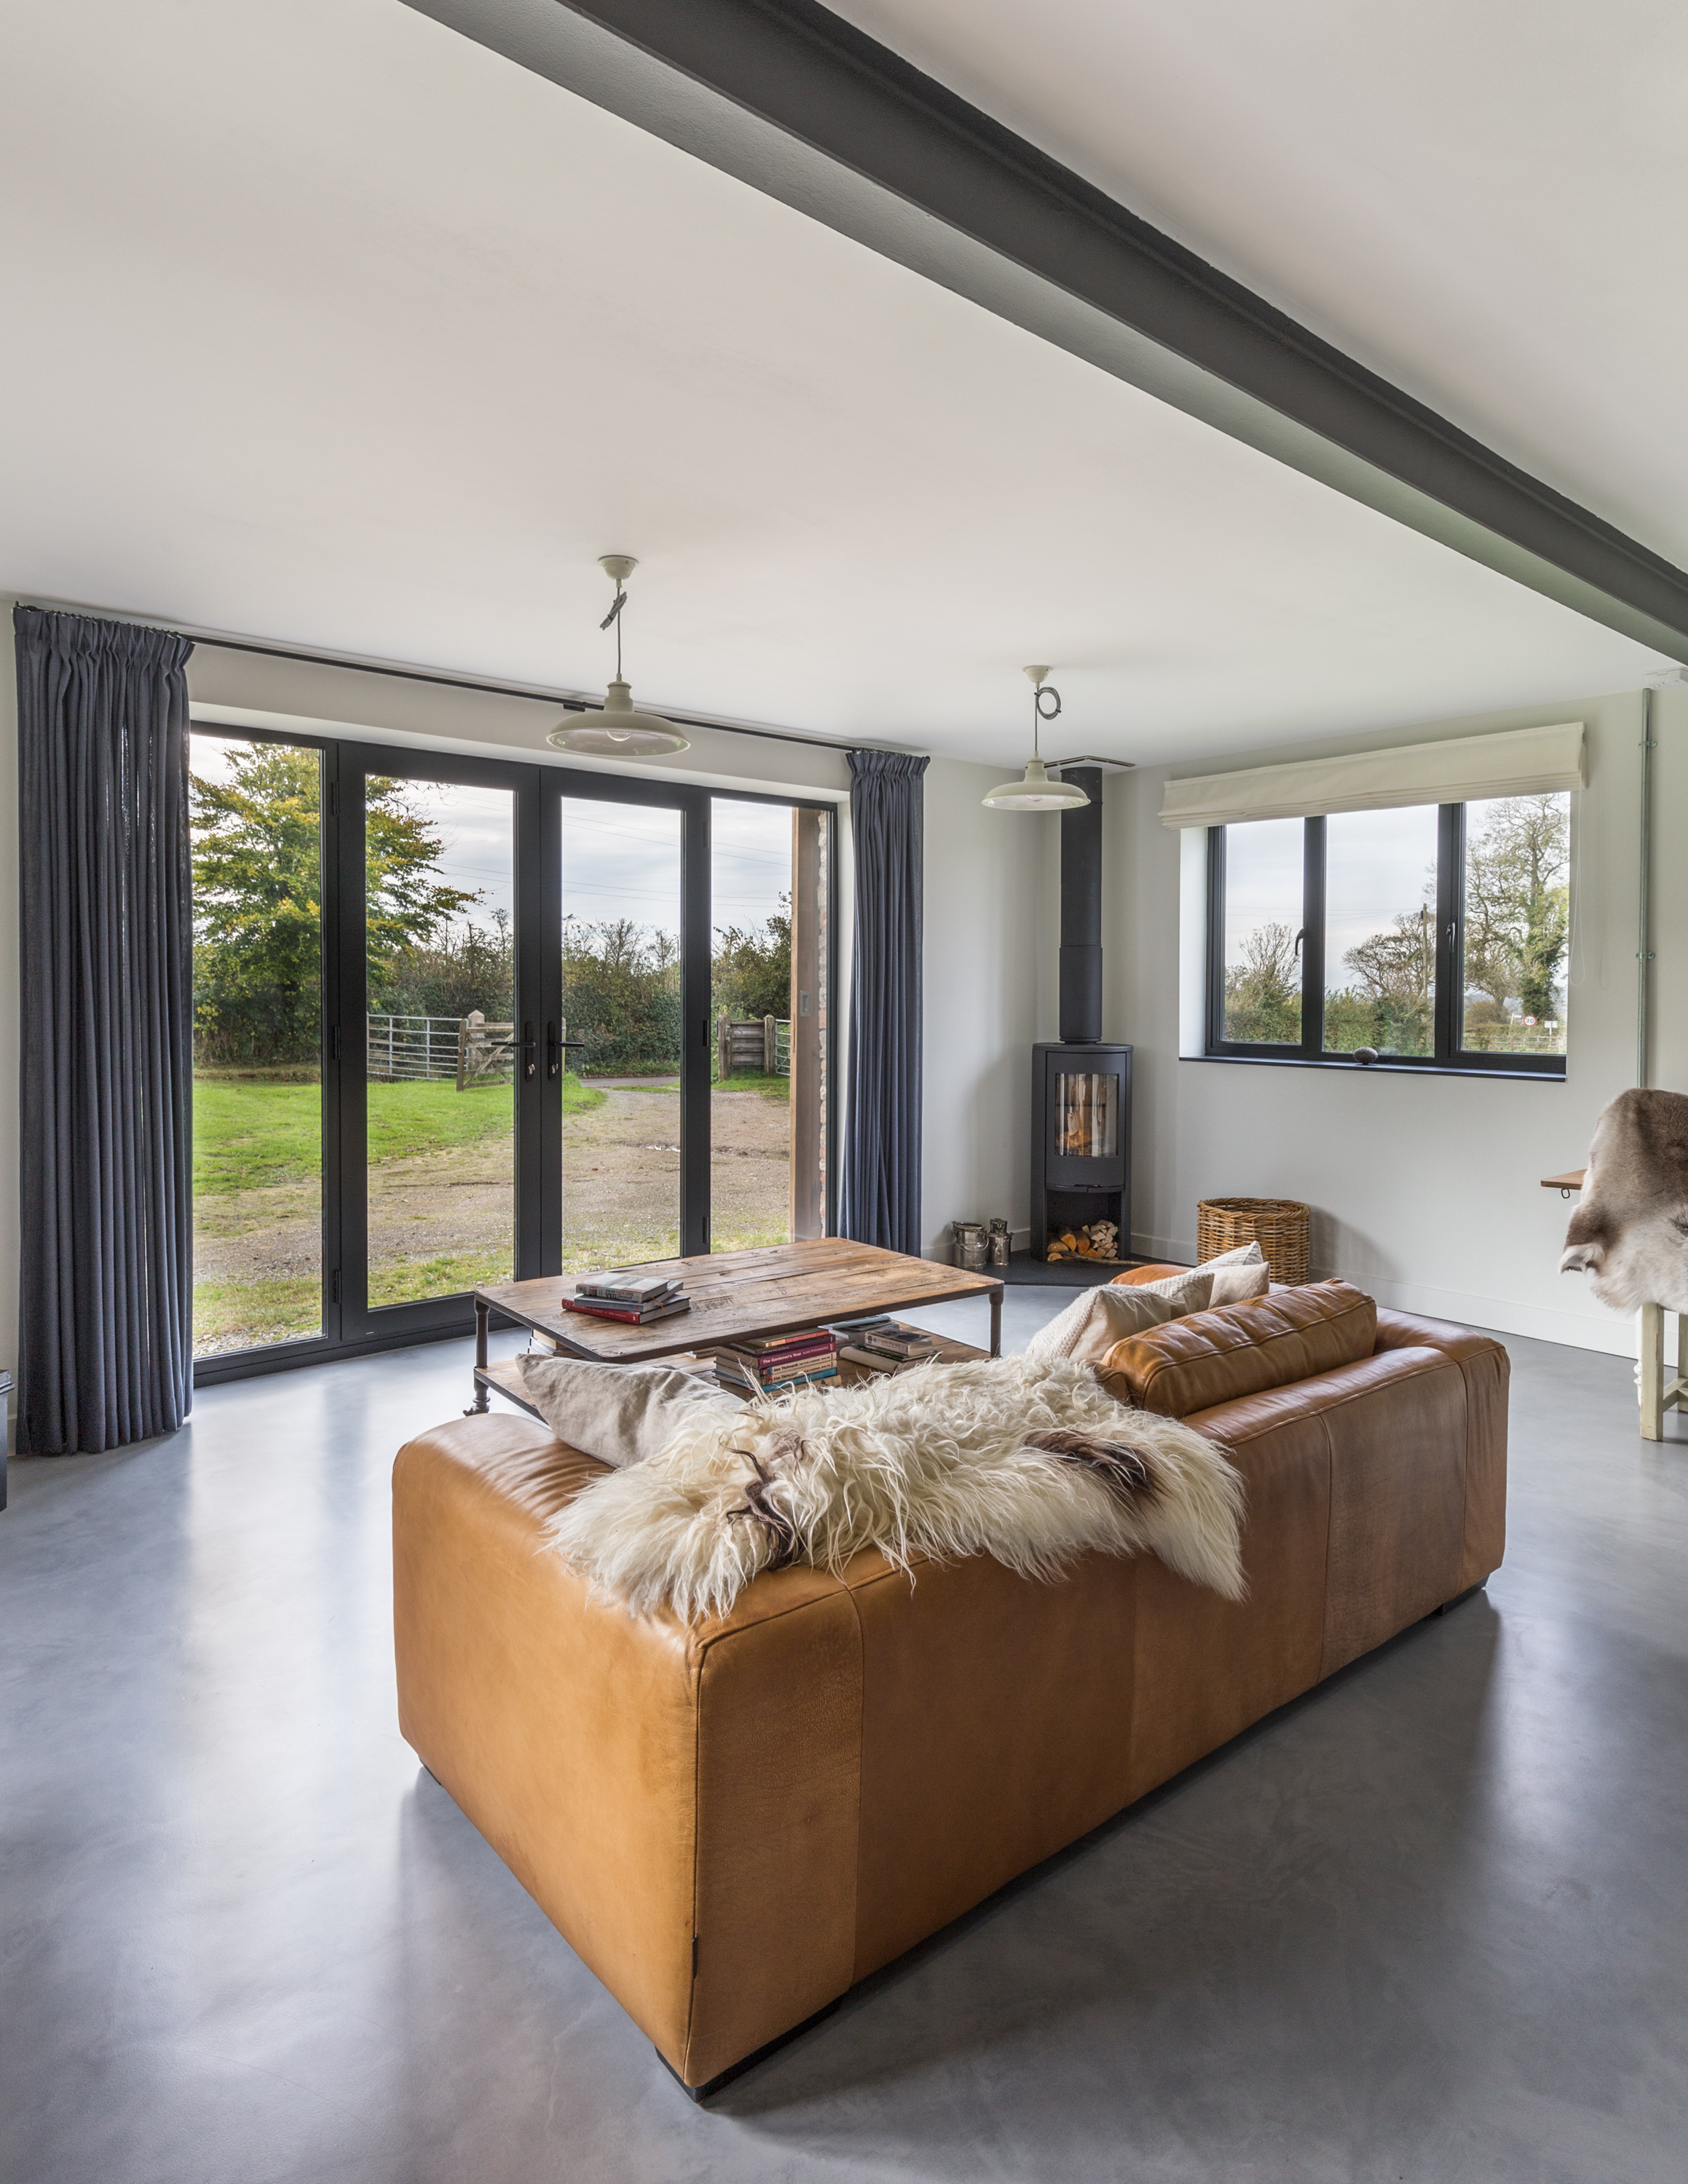 </p> <p>Find your ideal home design pro on designfor-me.com - get matched and see who's interested in your home project. Click image to see more inspiration from our design pros</p> <p>Design by Craig, architect from Wiltshire, South West</p> <p>#architecture #homedesign #modernhomes #homeinspiration #extensions #extensiondesign #extensioninspiration #extensionideas #houseextension #bifolddoors #bifolds </p> <p>